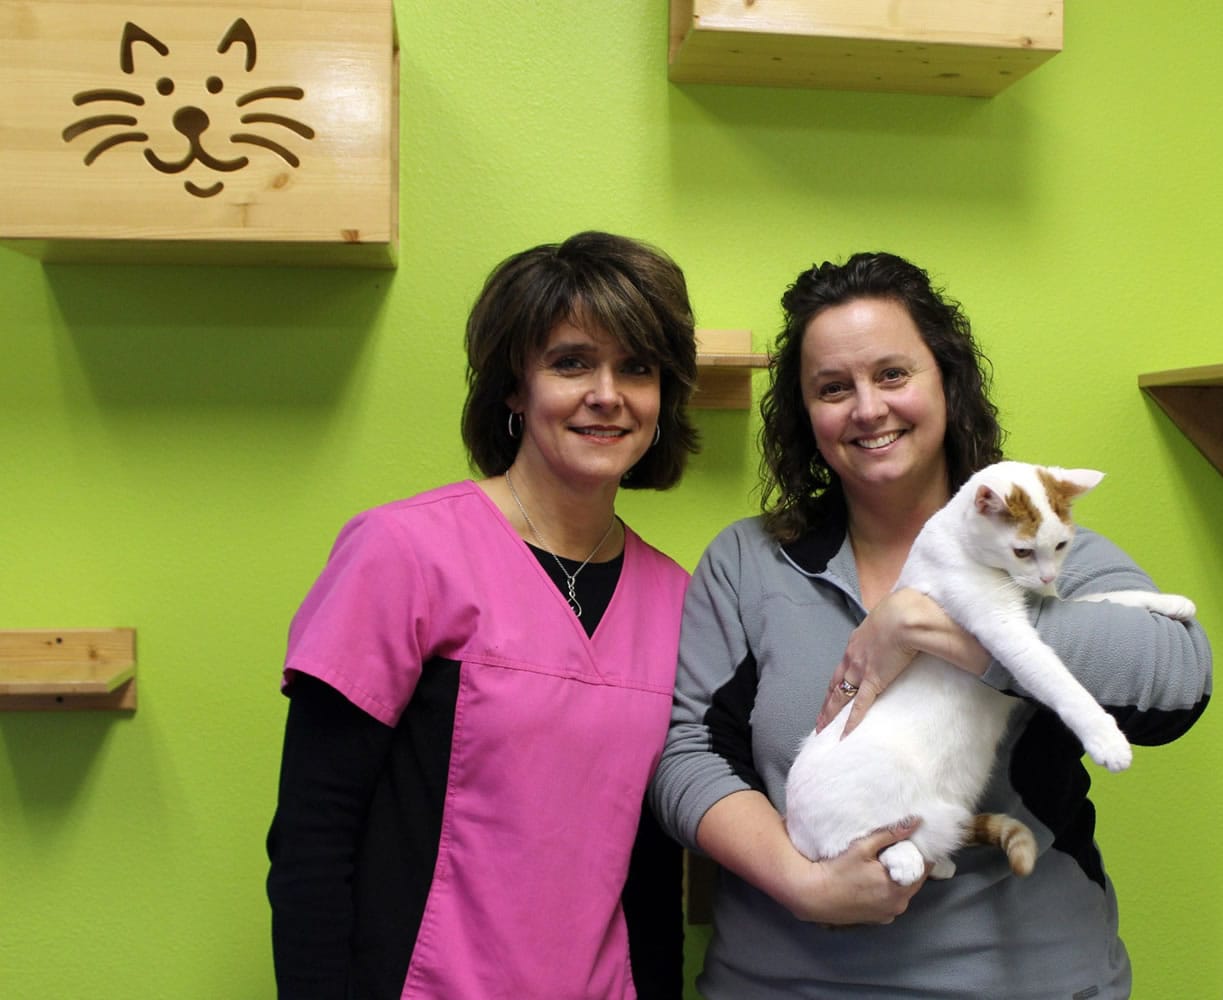 Fircrest: Cats Meow Luxury Boarding co-owners Jo Schmidt, left, and Amber Groff with Ollie at their cat sitting facility, which recently teamed up with Furry Friends to open an adoption room.